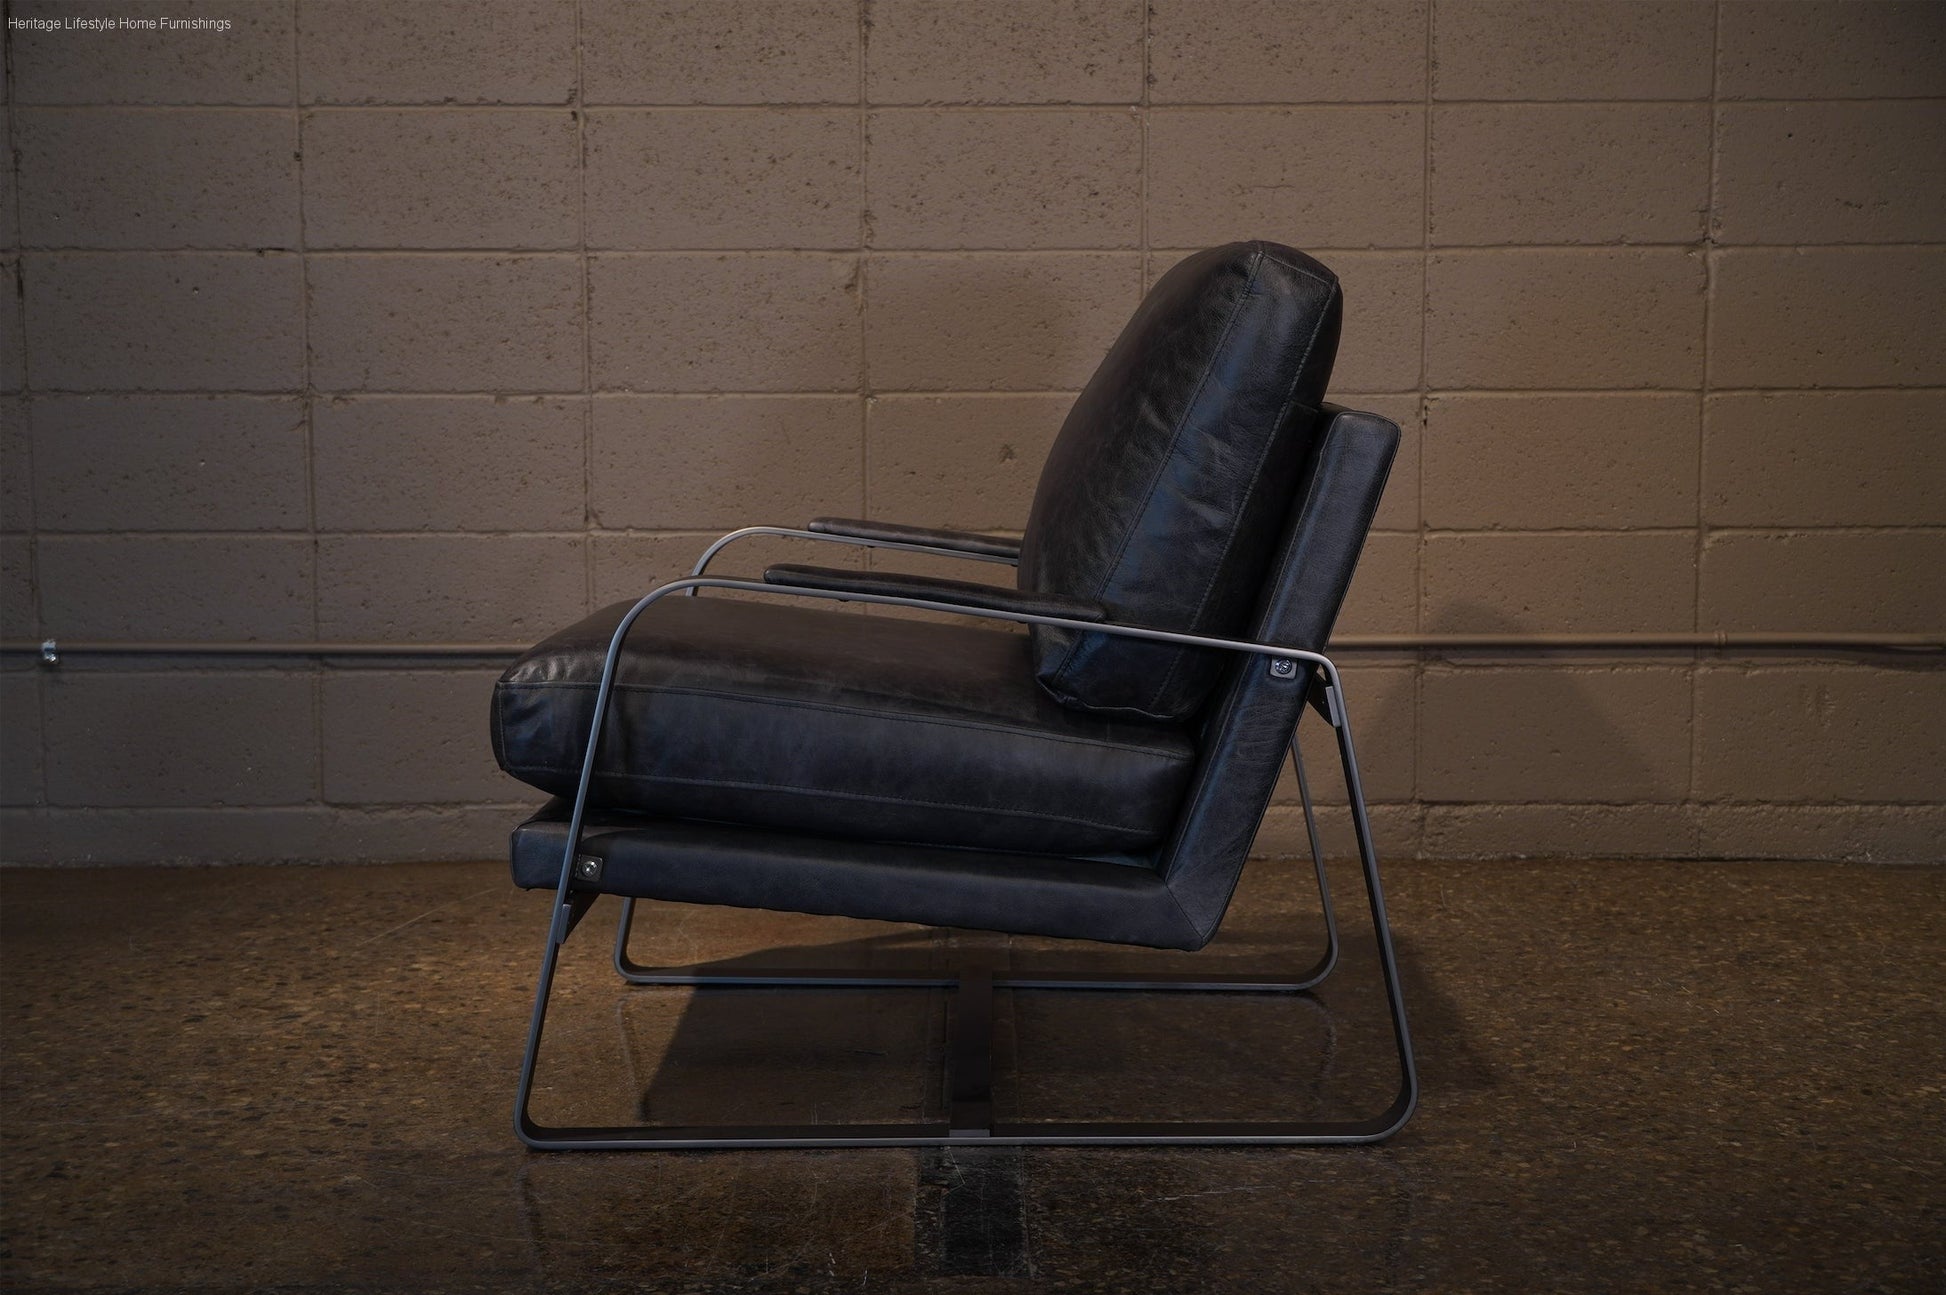 A1061-1(2A) Leather Accent Chair - Charcoal Furniture Stores Burlington Ontario Near Me HLHF